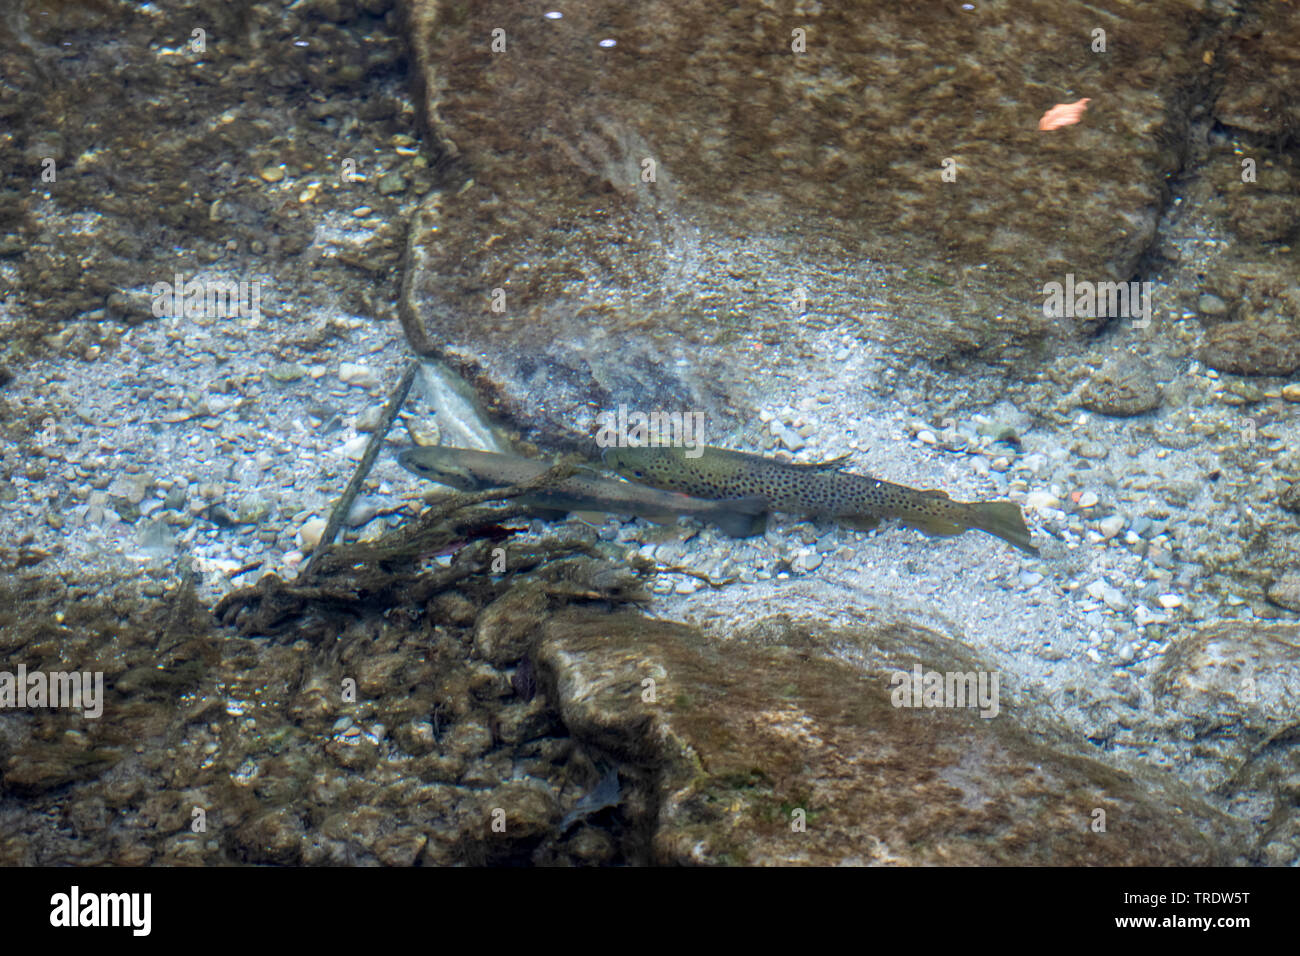 brown trout, river trout, brook trout (Salmo trutta fario), spawning, pair over the breeding ground in a river, Germany, Bavaria, Prien Stock Photo